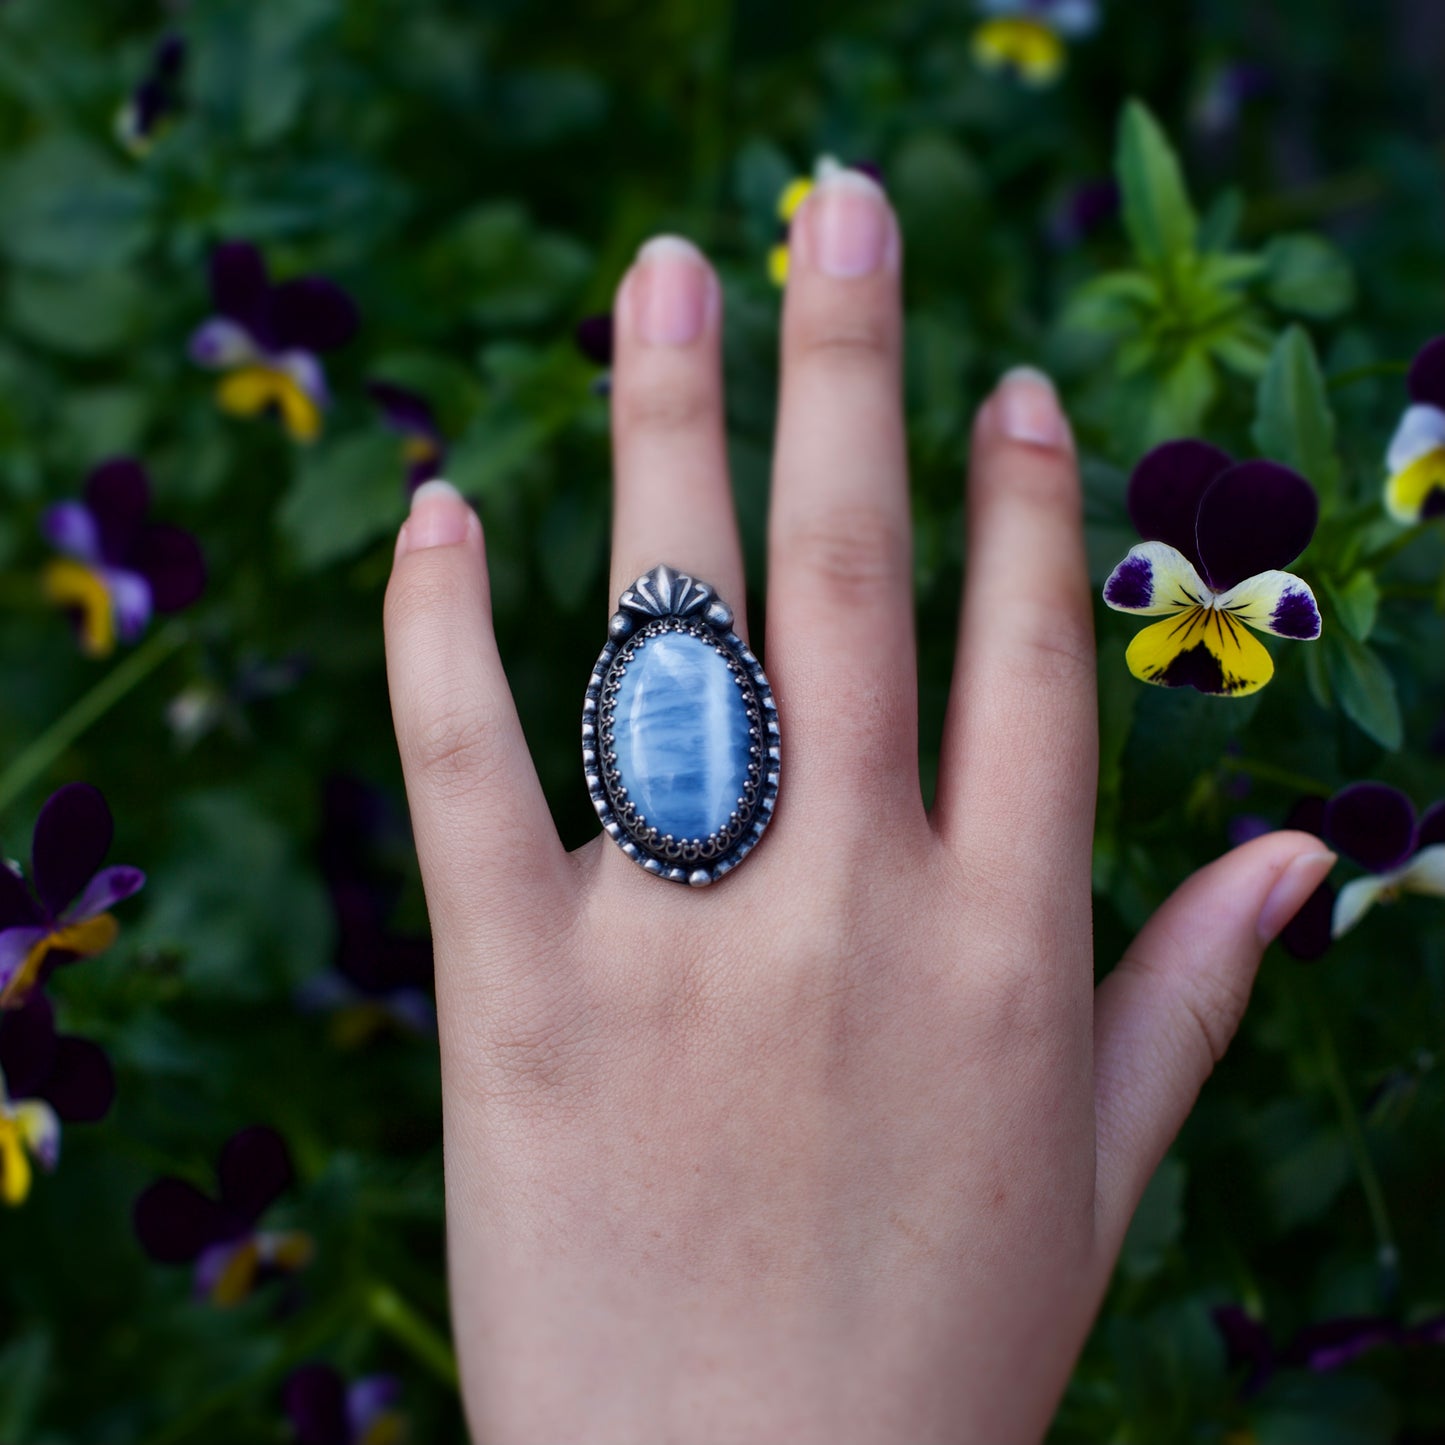 The Ocean Blue Opal Ring - Size: 7 1/4 or O